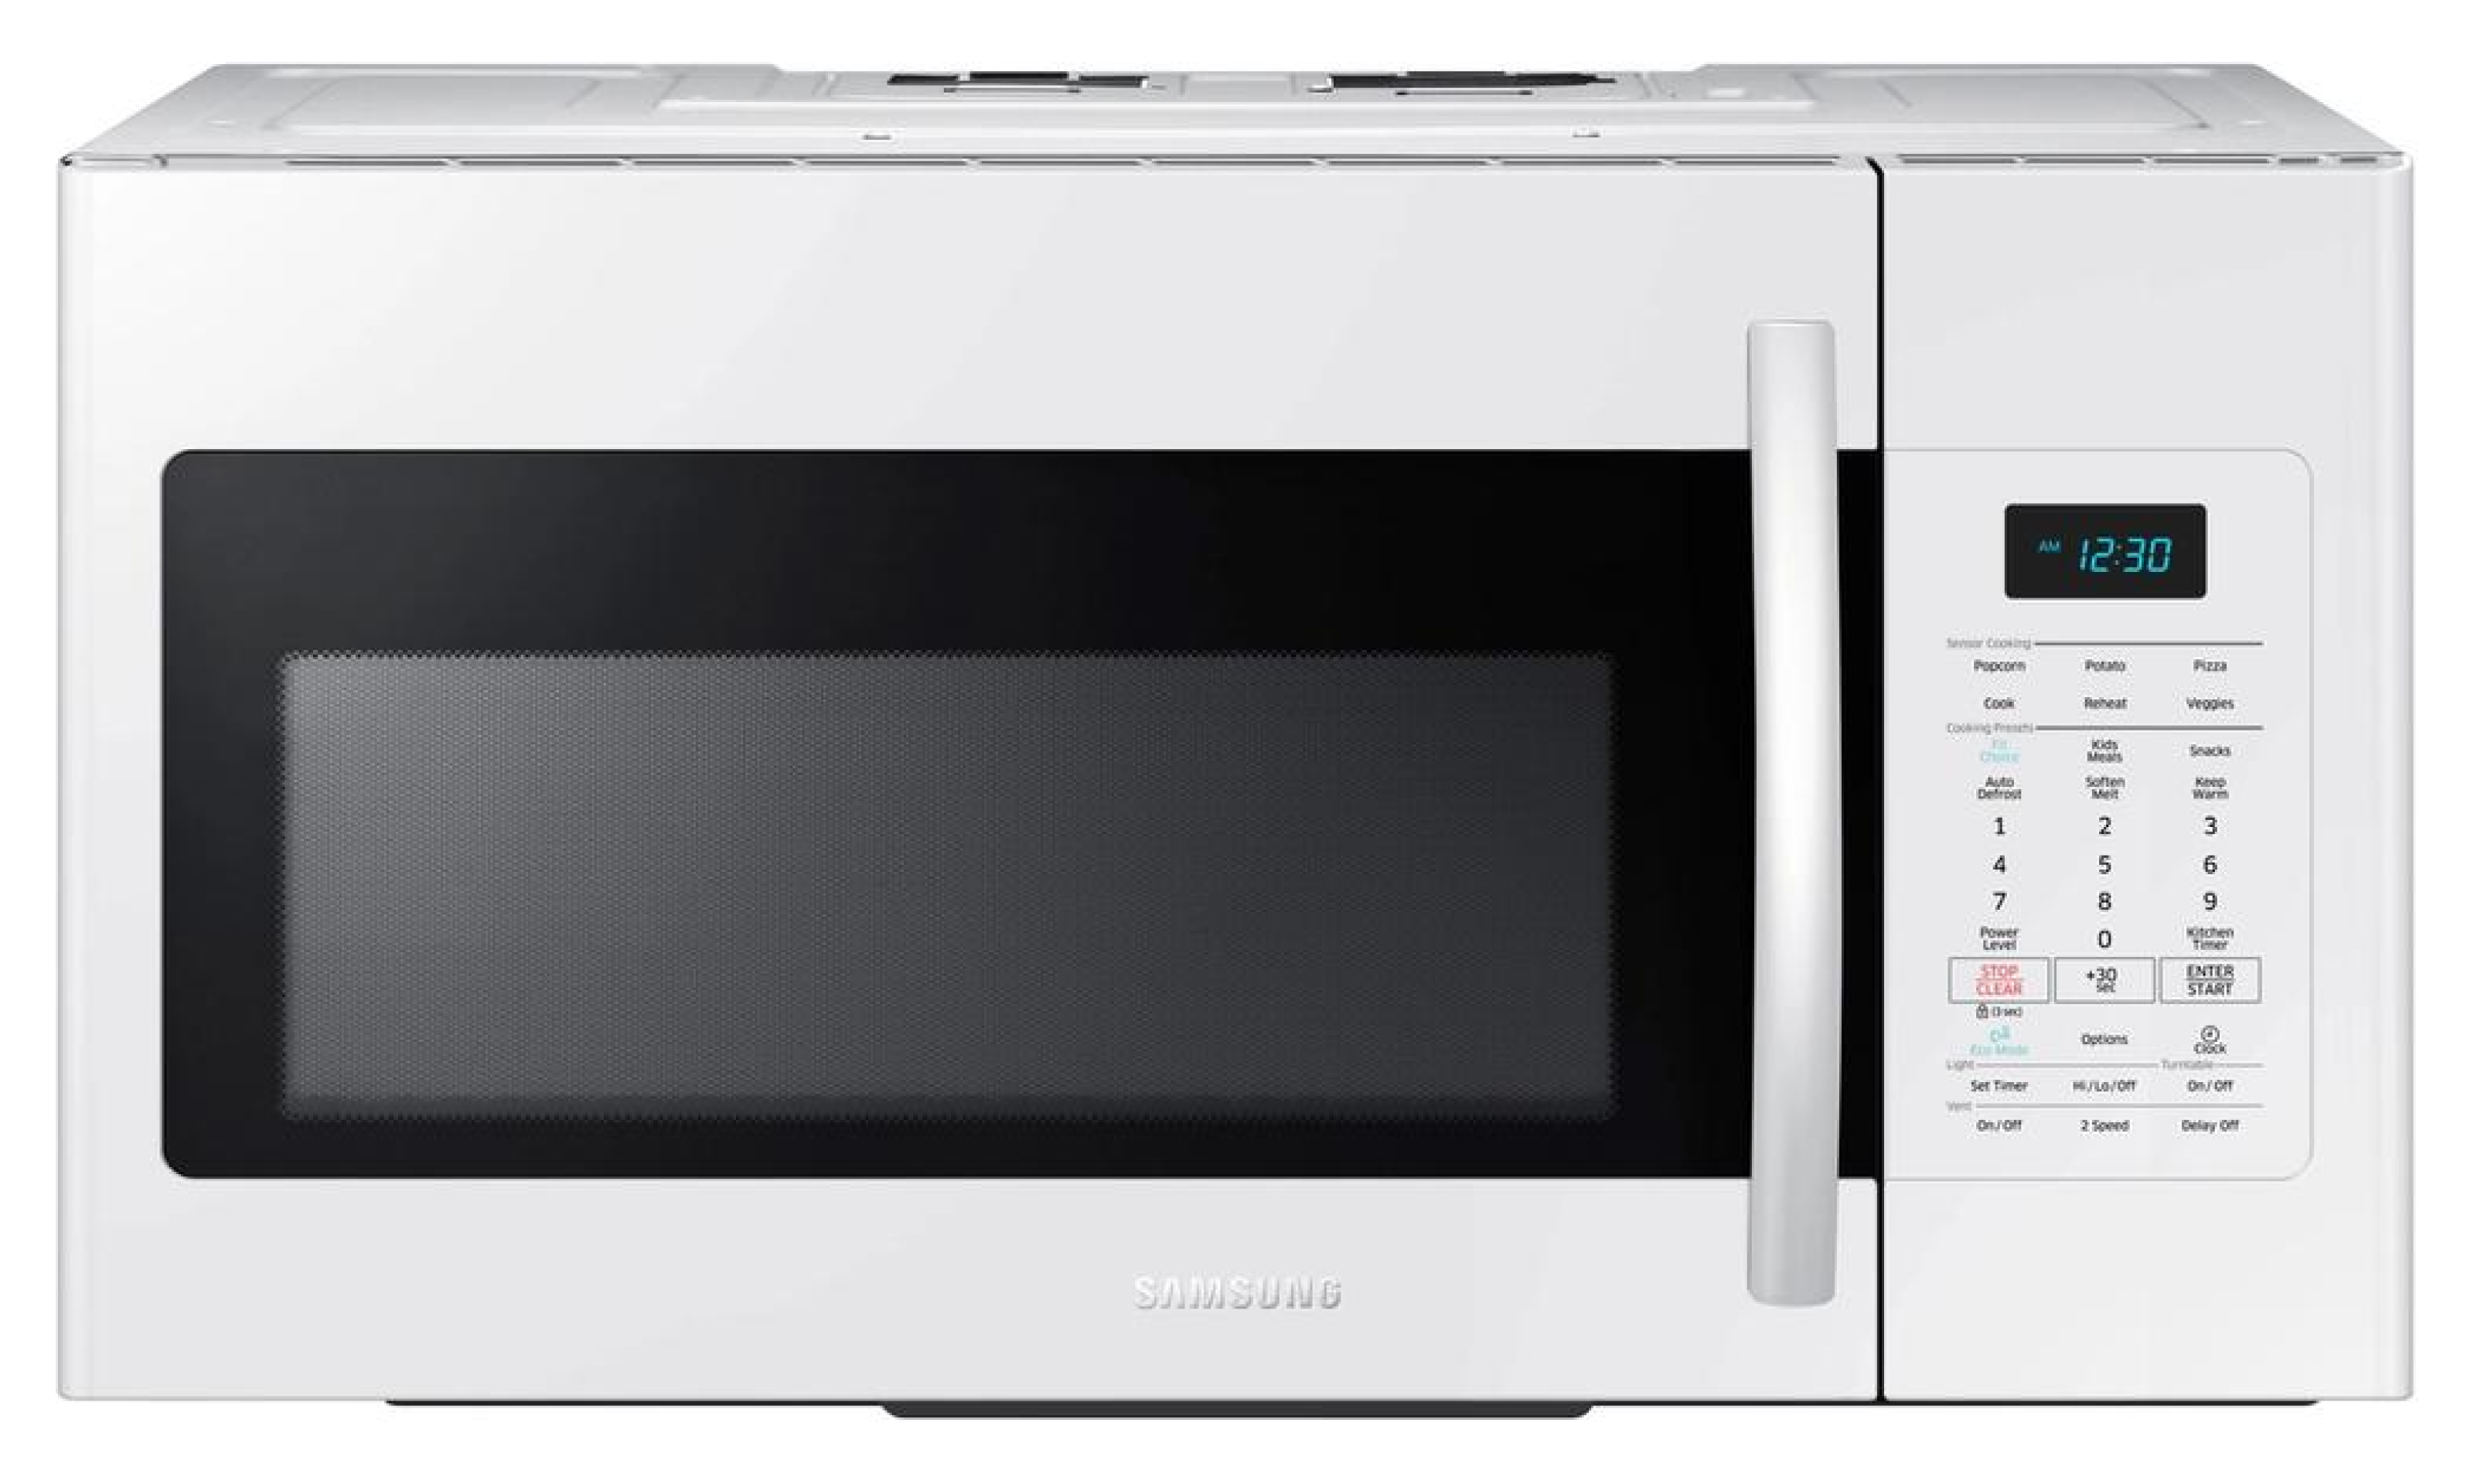 Samsung 1.7 Cu. Ft. Over-the-Range Microwave - ME17H703SHW